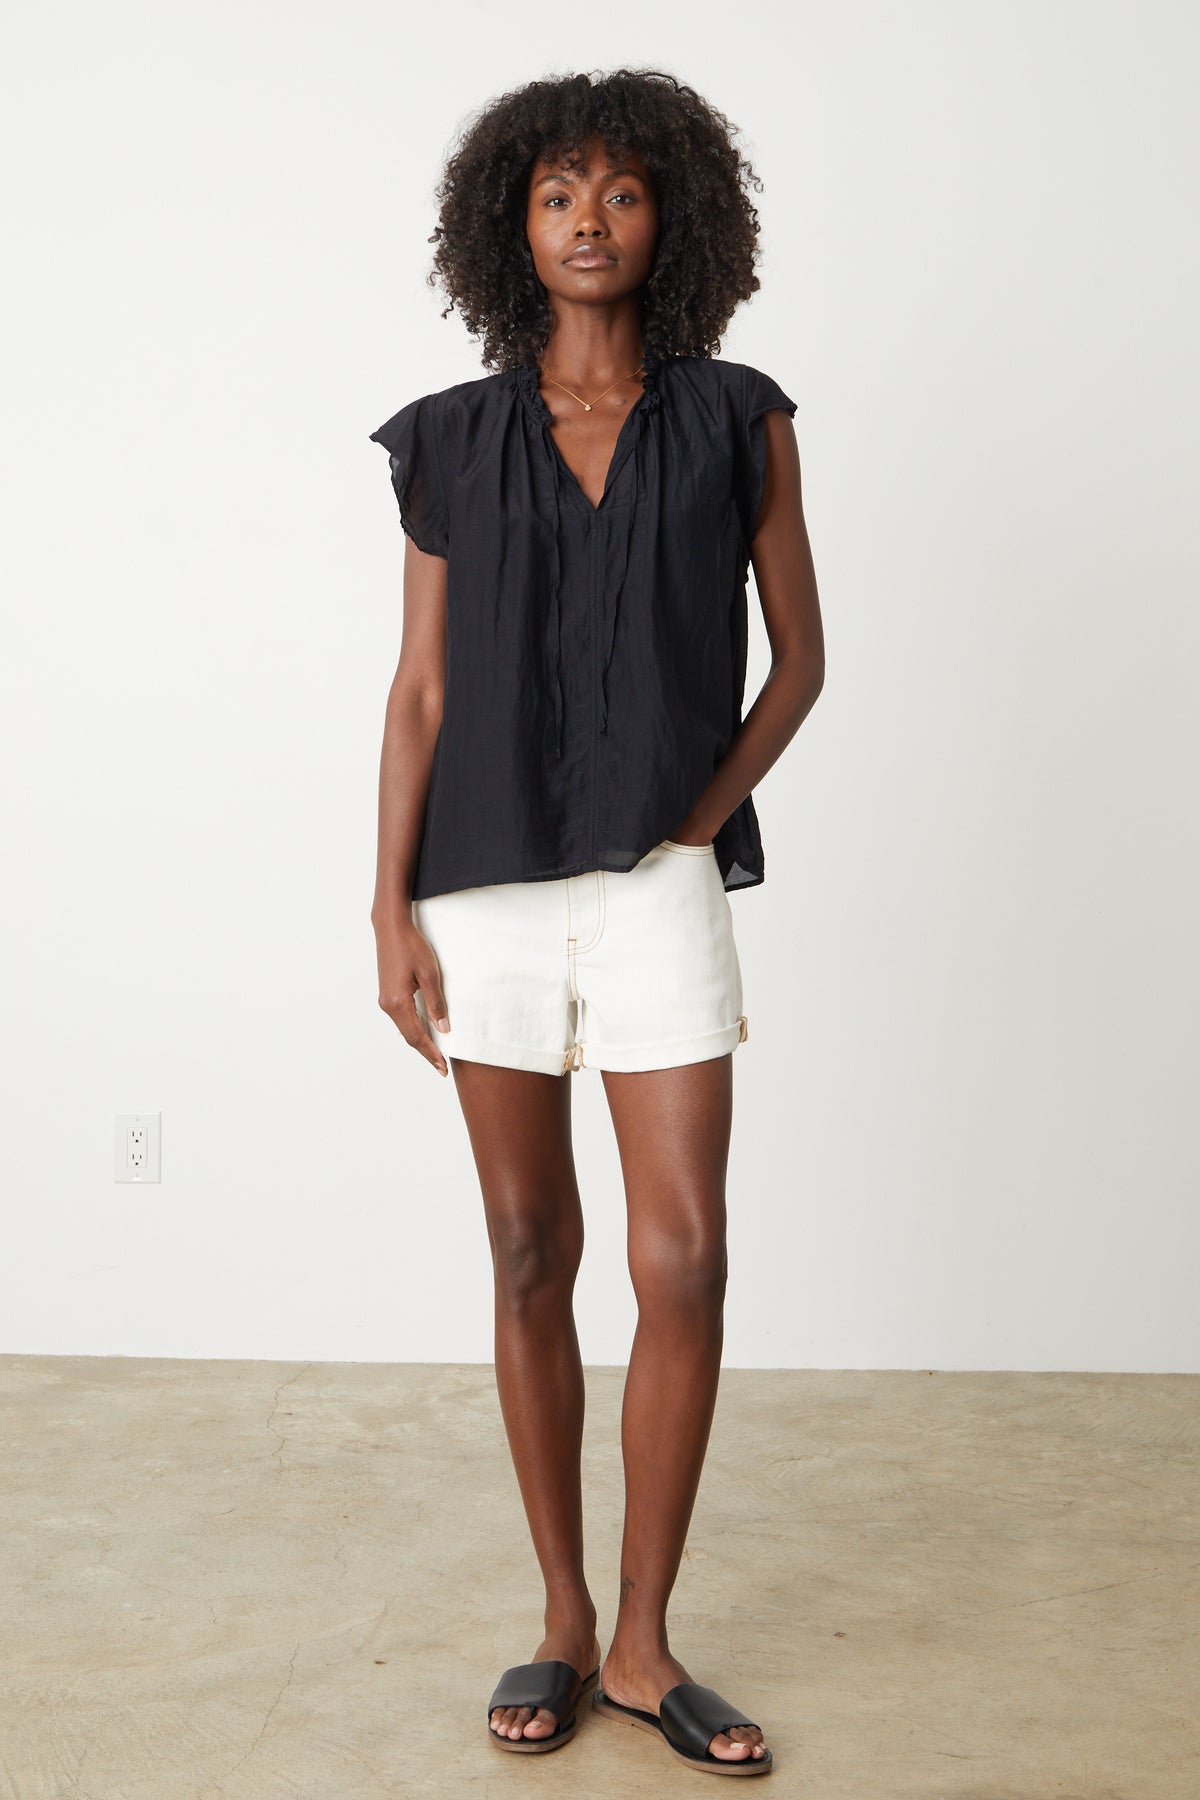 The model is wearing a Velvet by Graham & Spencer white silk MELANIE V-NECK BLOUSE and shorts in a display of lightness and romance.-35205235704001